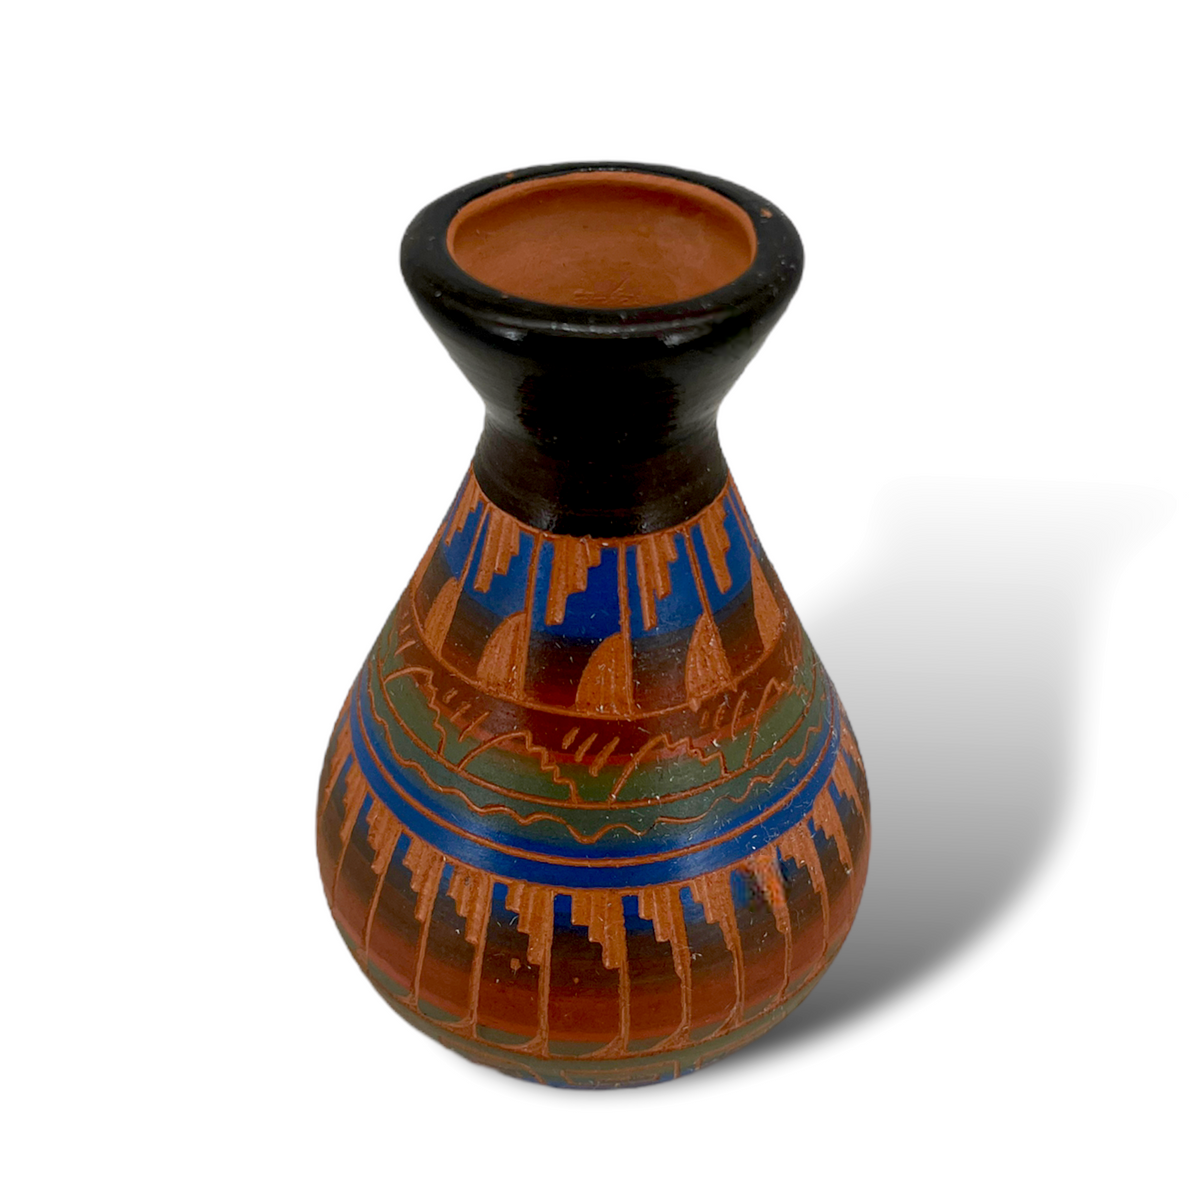 Authentic Native American Pottery, Miniature Traditional Vase Style, Genuine Navajo Tribe USA Handpainted and Etched, Artist Signed, Southwestern Home Decor Collectible